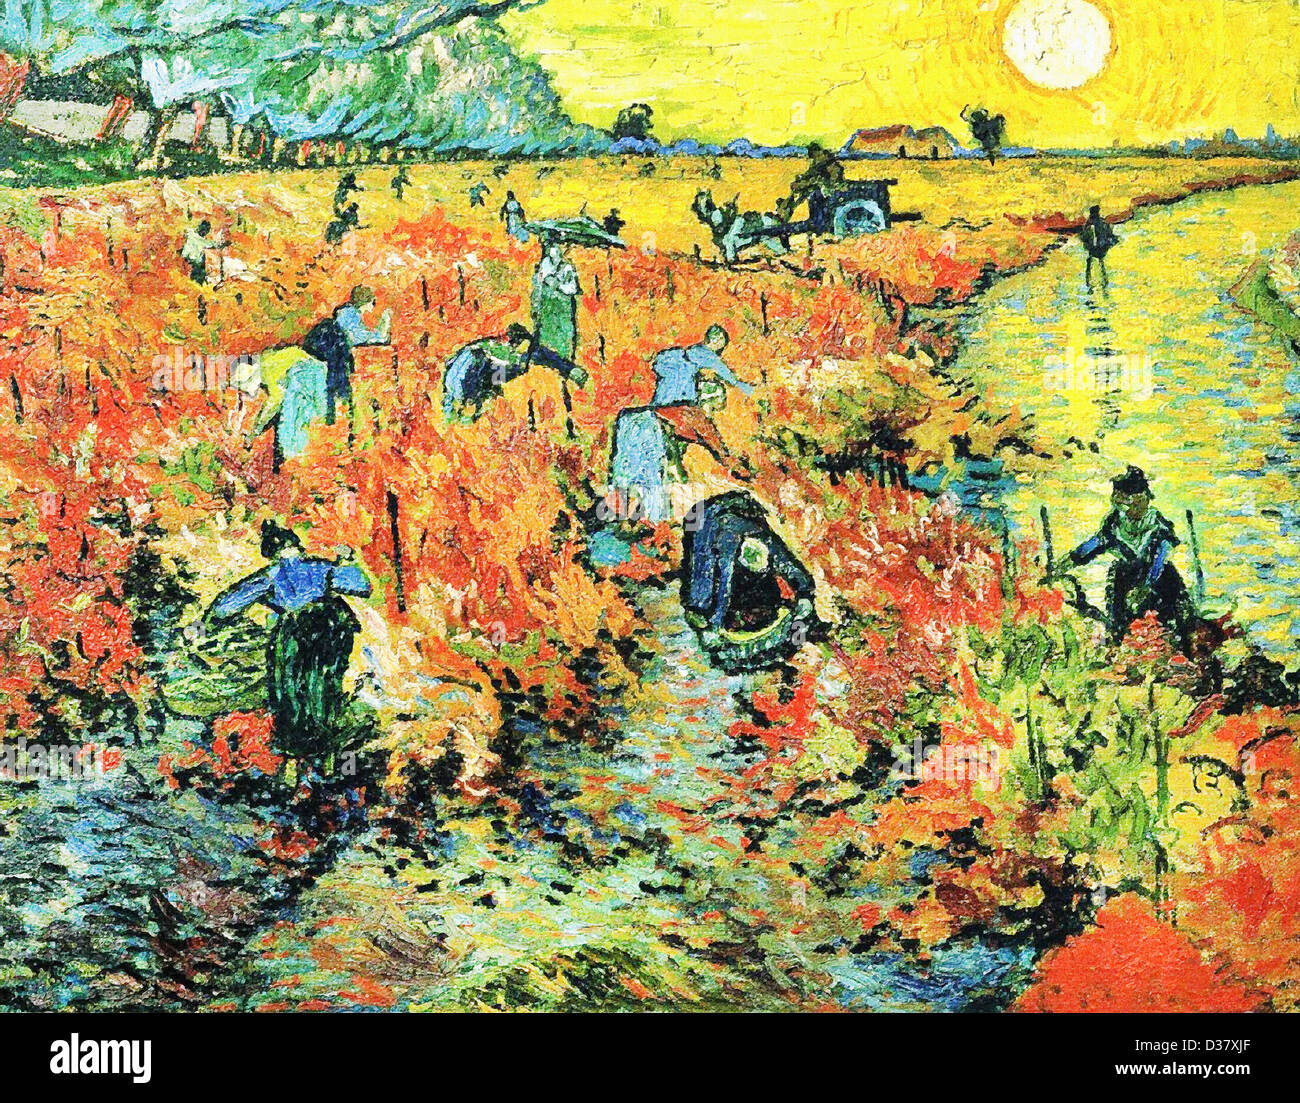 Vincent van Gogh, Red Vineyards at Arles. 1888. Post-Impressionism. Oil on  canvas. Pushkin Museum of Fine Art, Moscow, Russia Stock Photo - Alamy